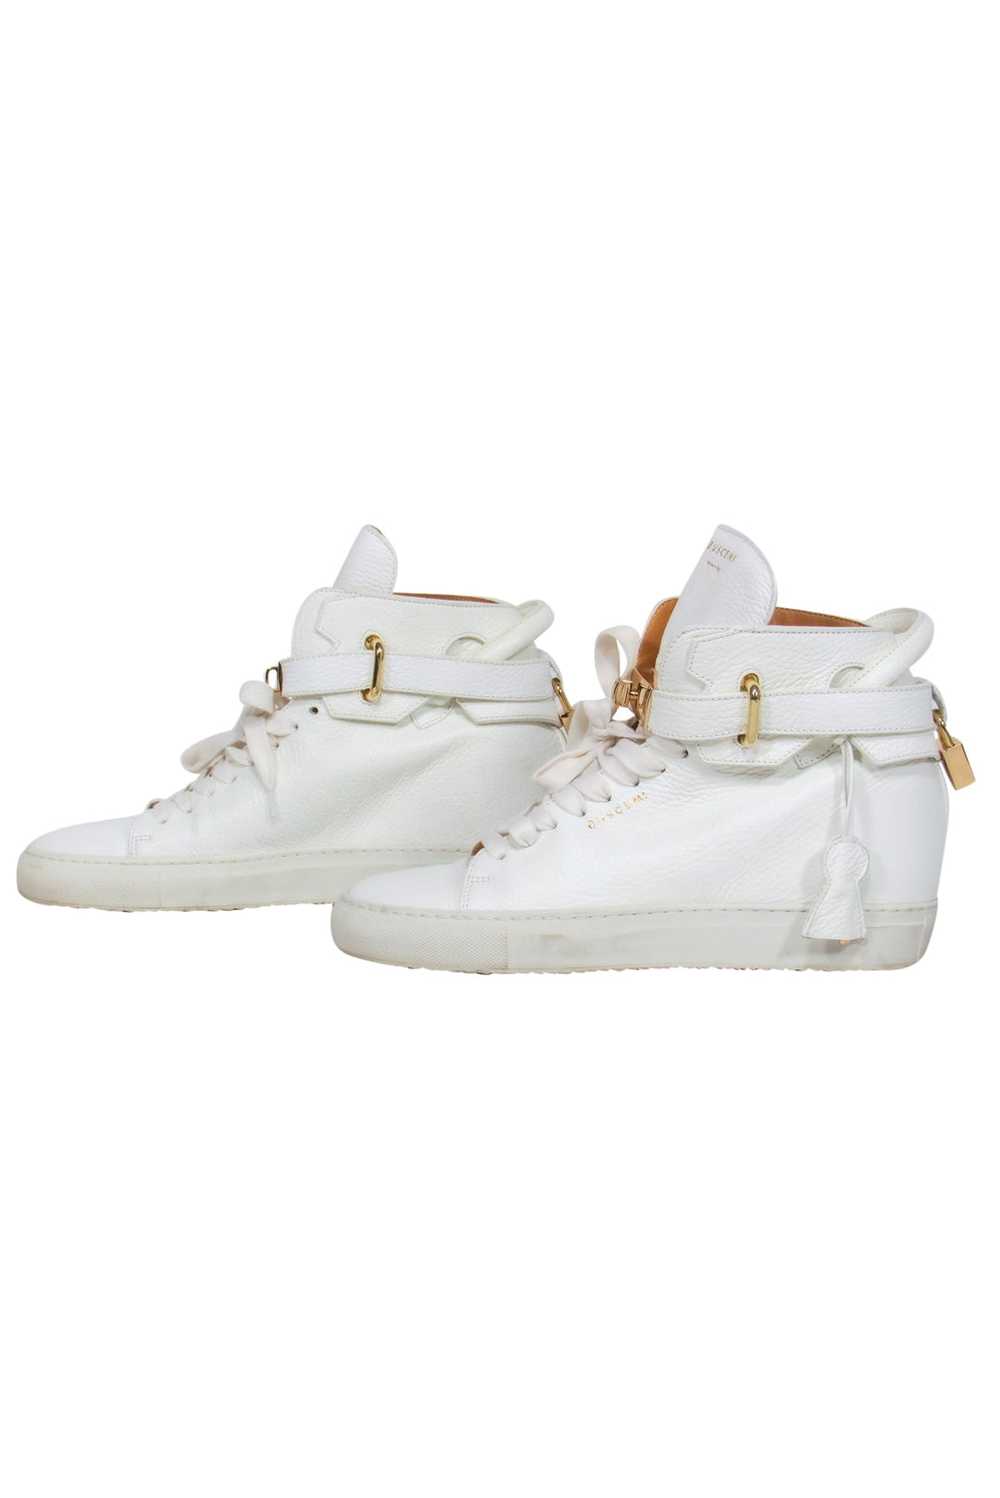 Buscemi - White 100MM Sneakers w/ Gold-Toned Hard… - image 3